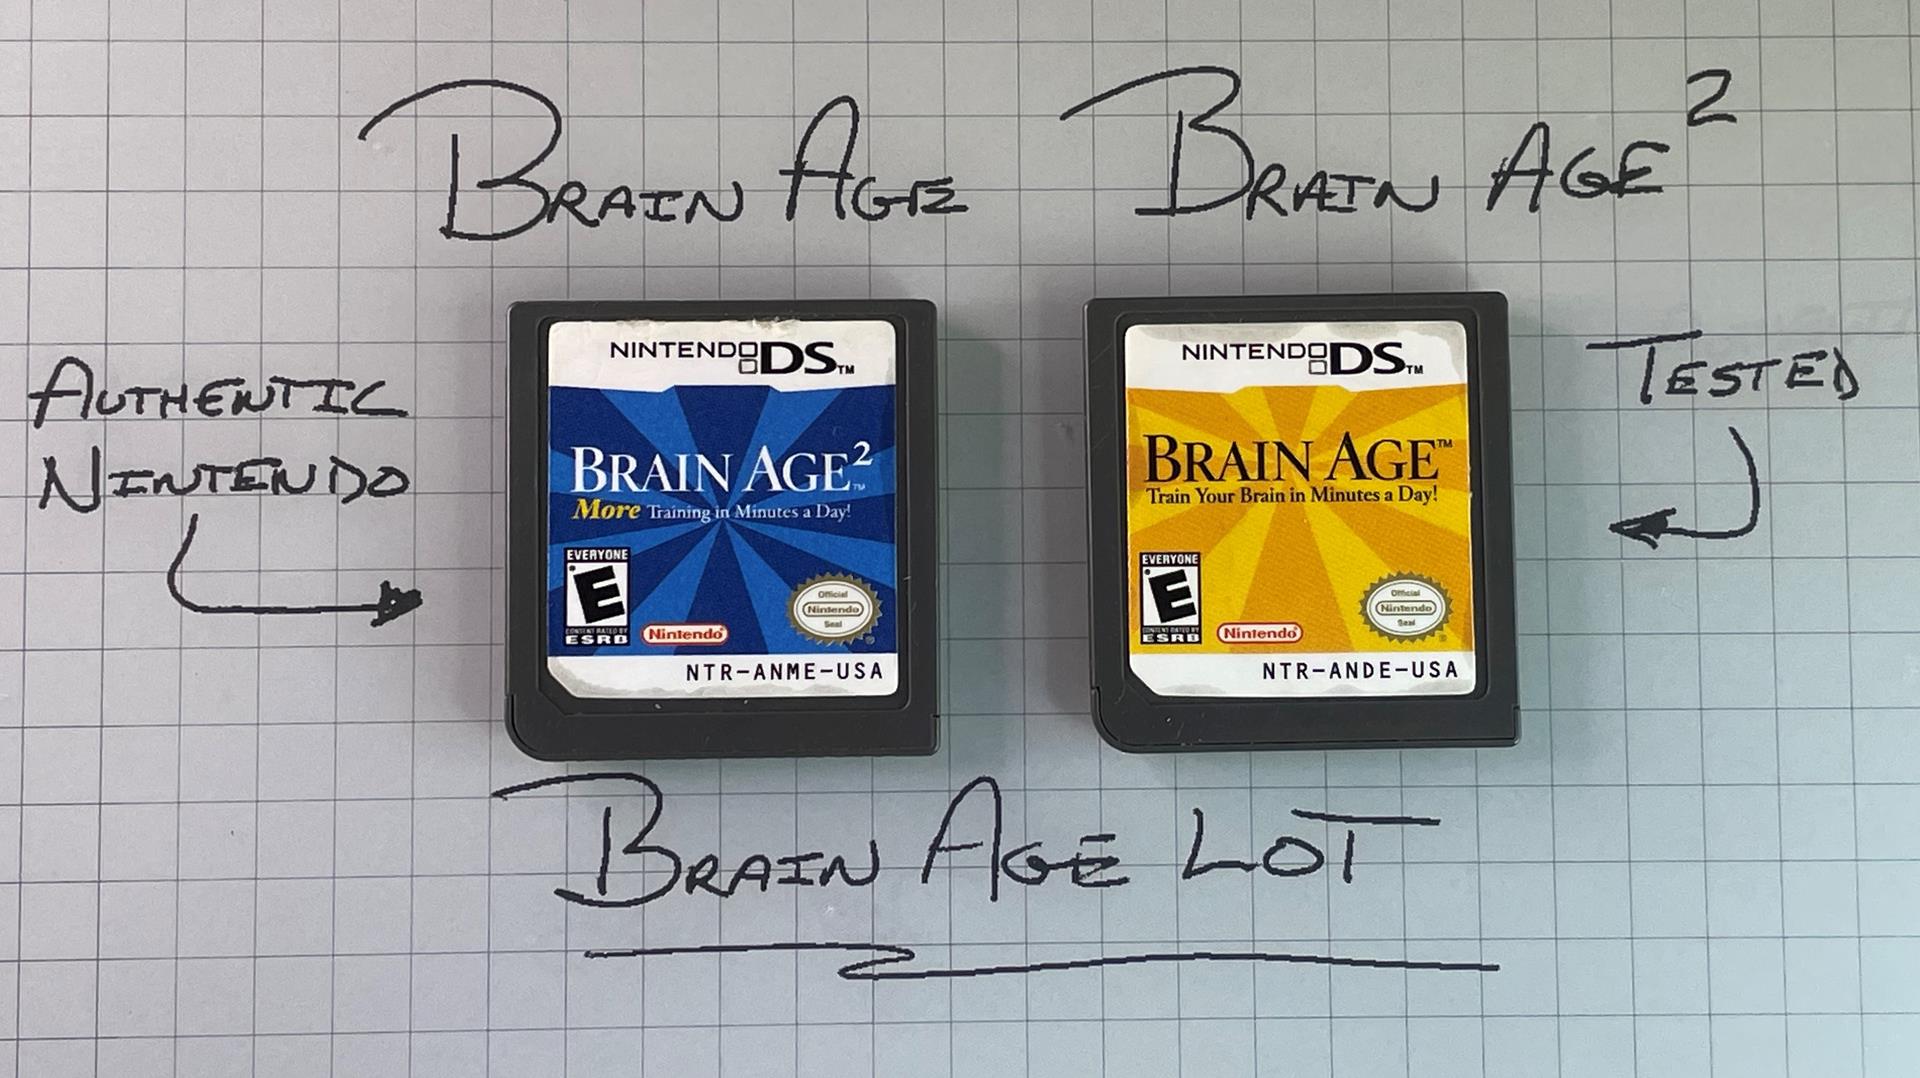 Brain age (DS). Brain age Nintendo DS. Brain age Nintendo. Flash Focus: Vision Training in minutes a Day Nintendo.